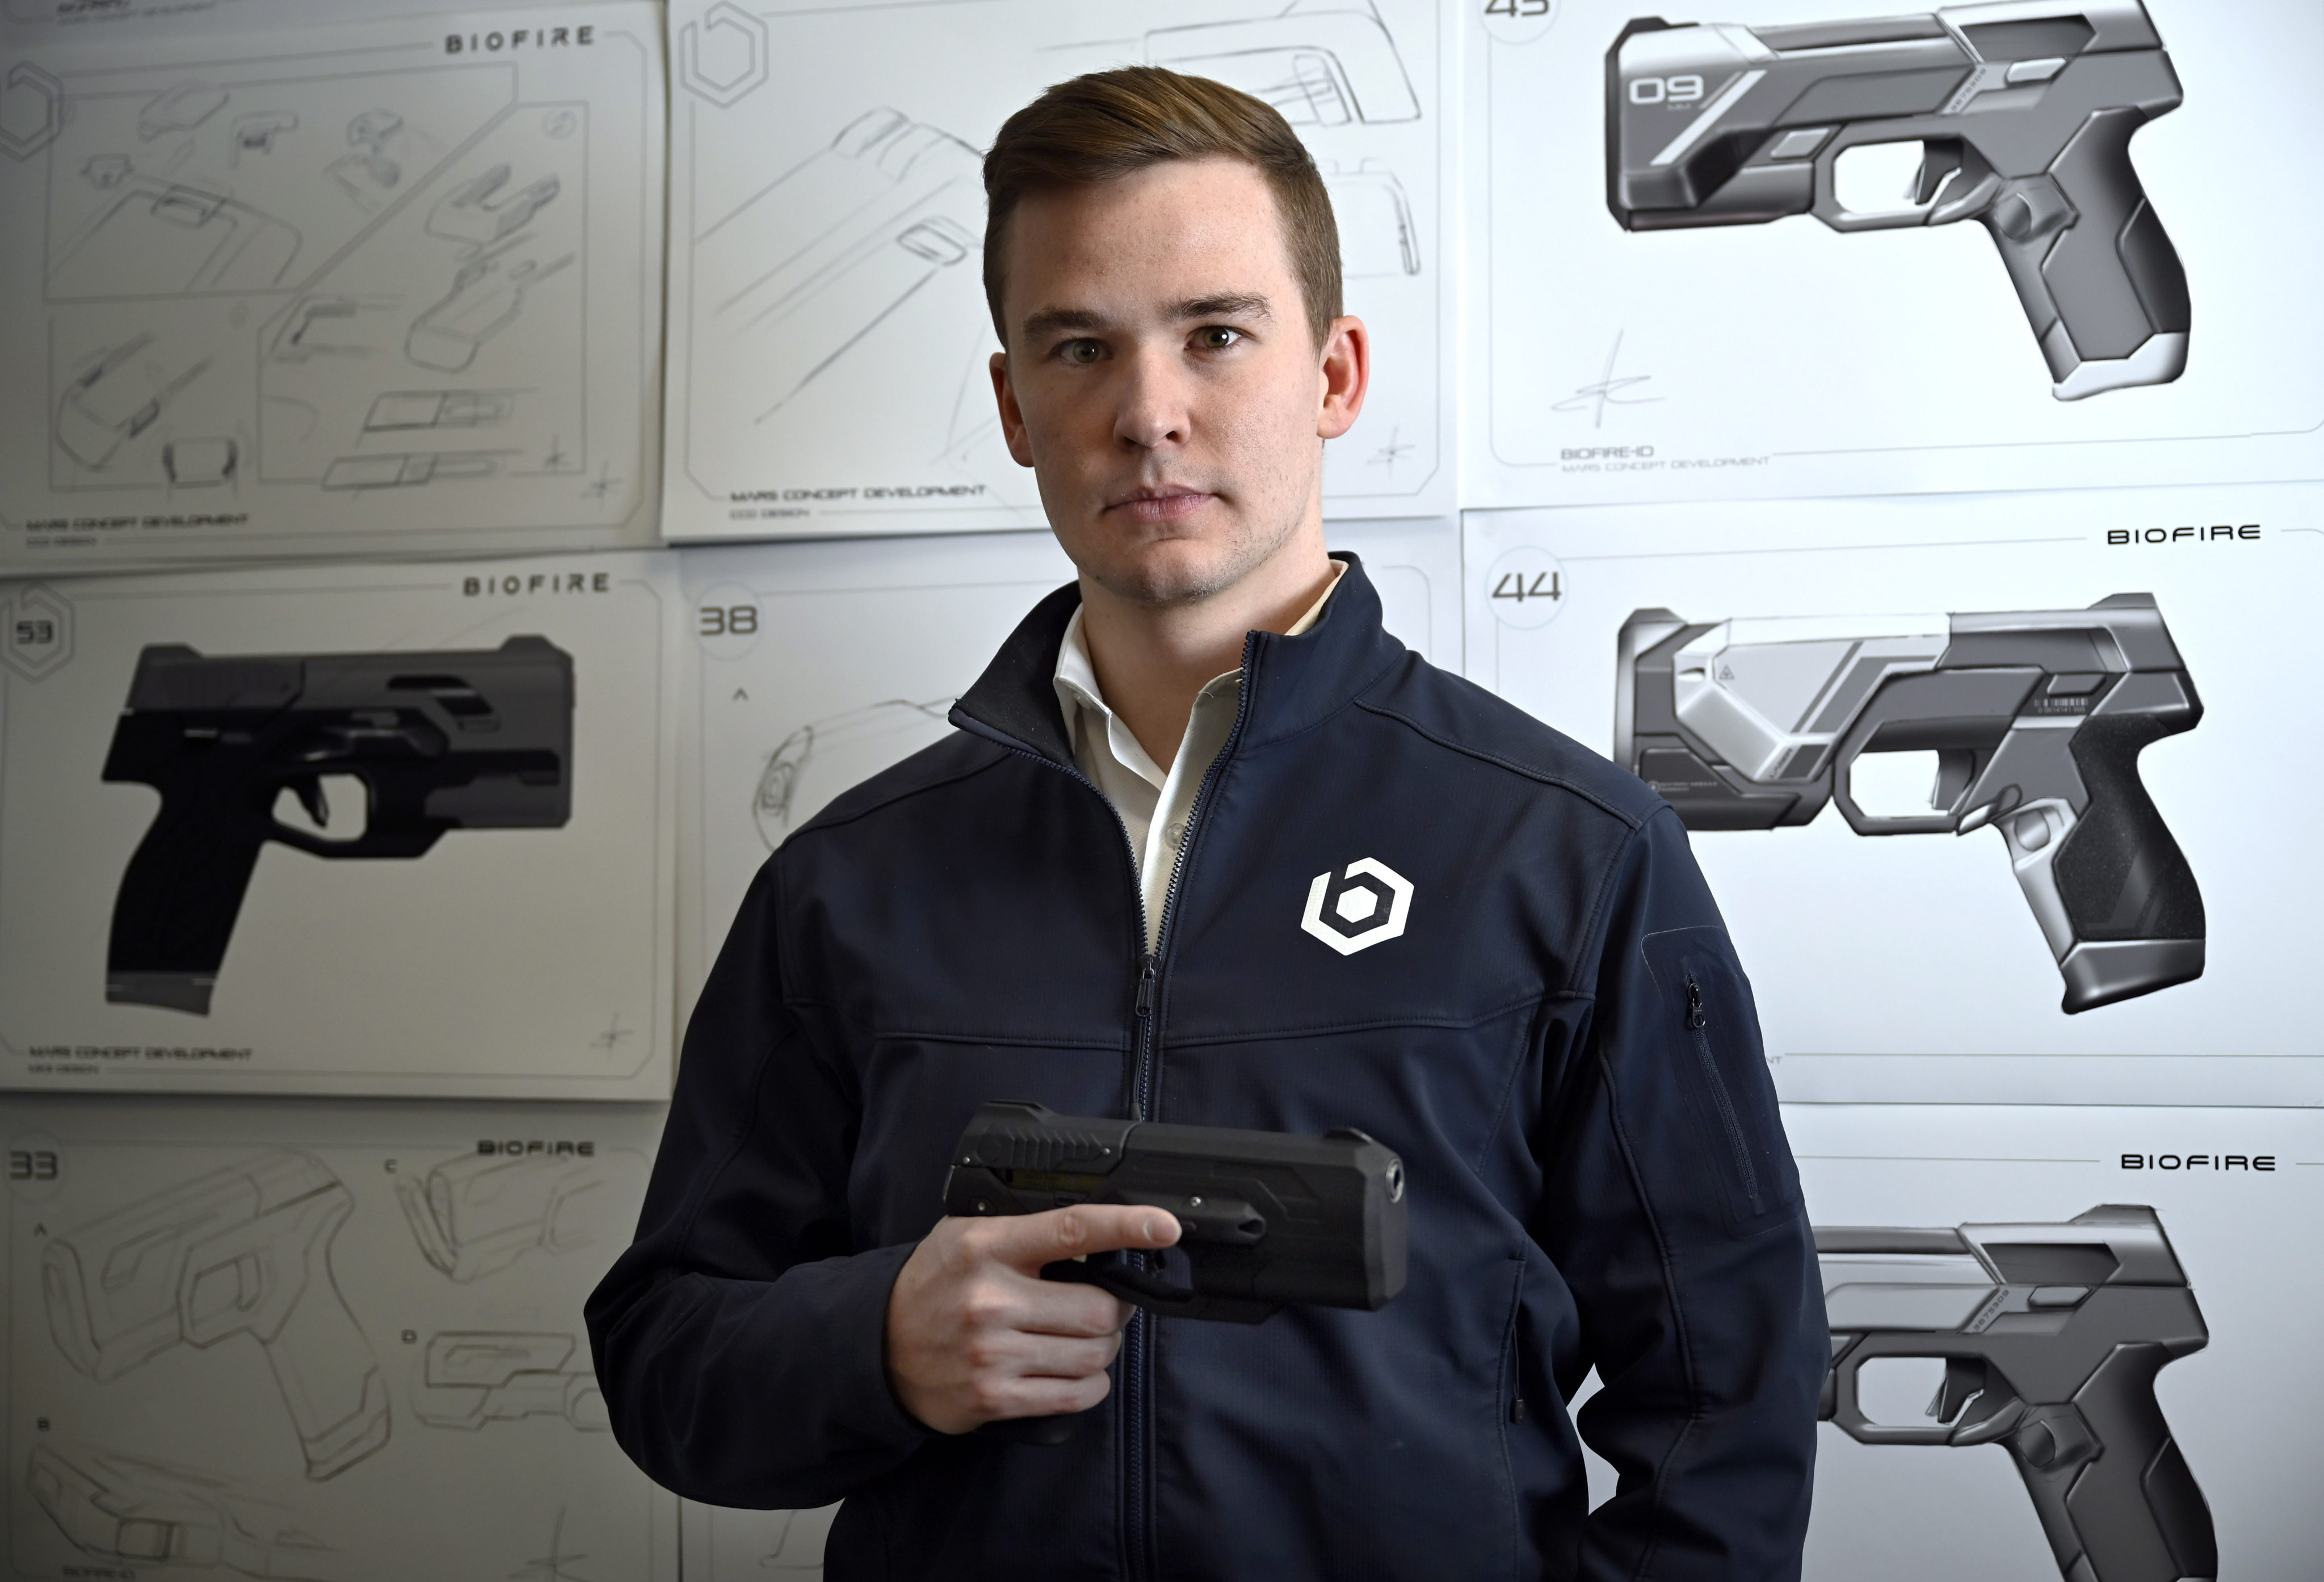 Kai Kloepfer, the founder and CEO of US ‘smart gun’ manufacturer Biofire Tech, stands in front of product drawings at the company’s headquarters in Colorado. Photo: TNS